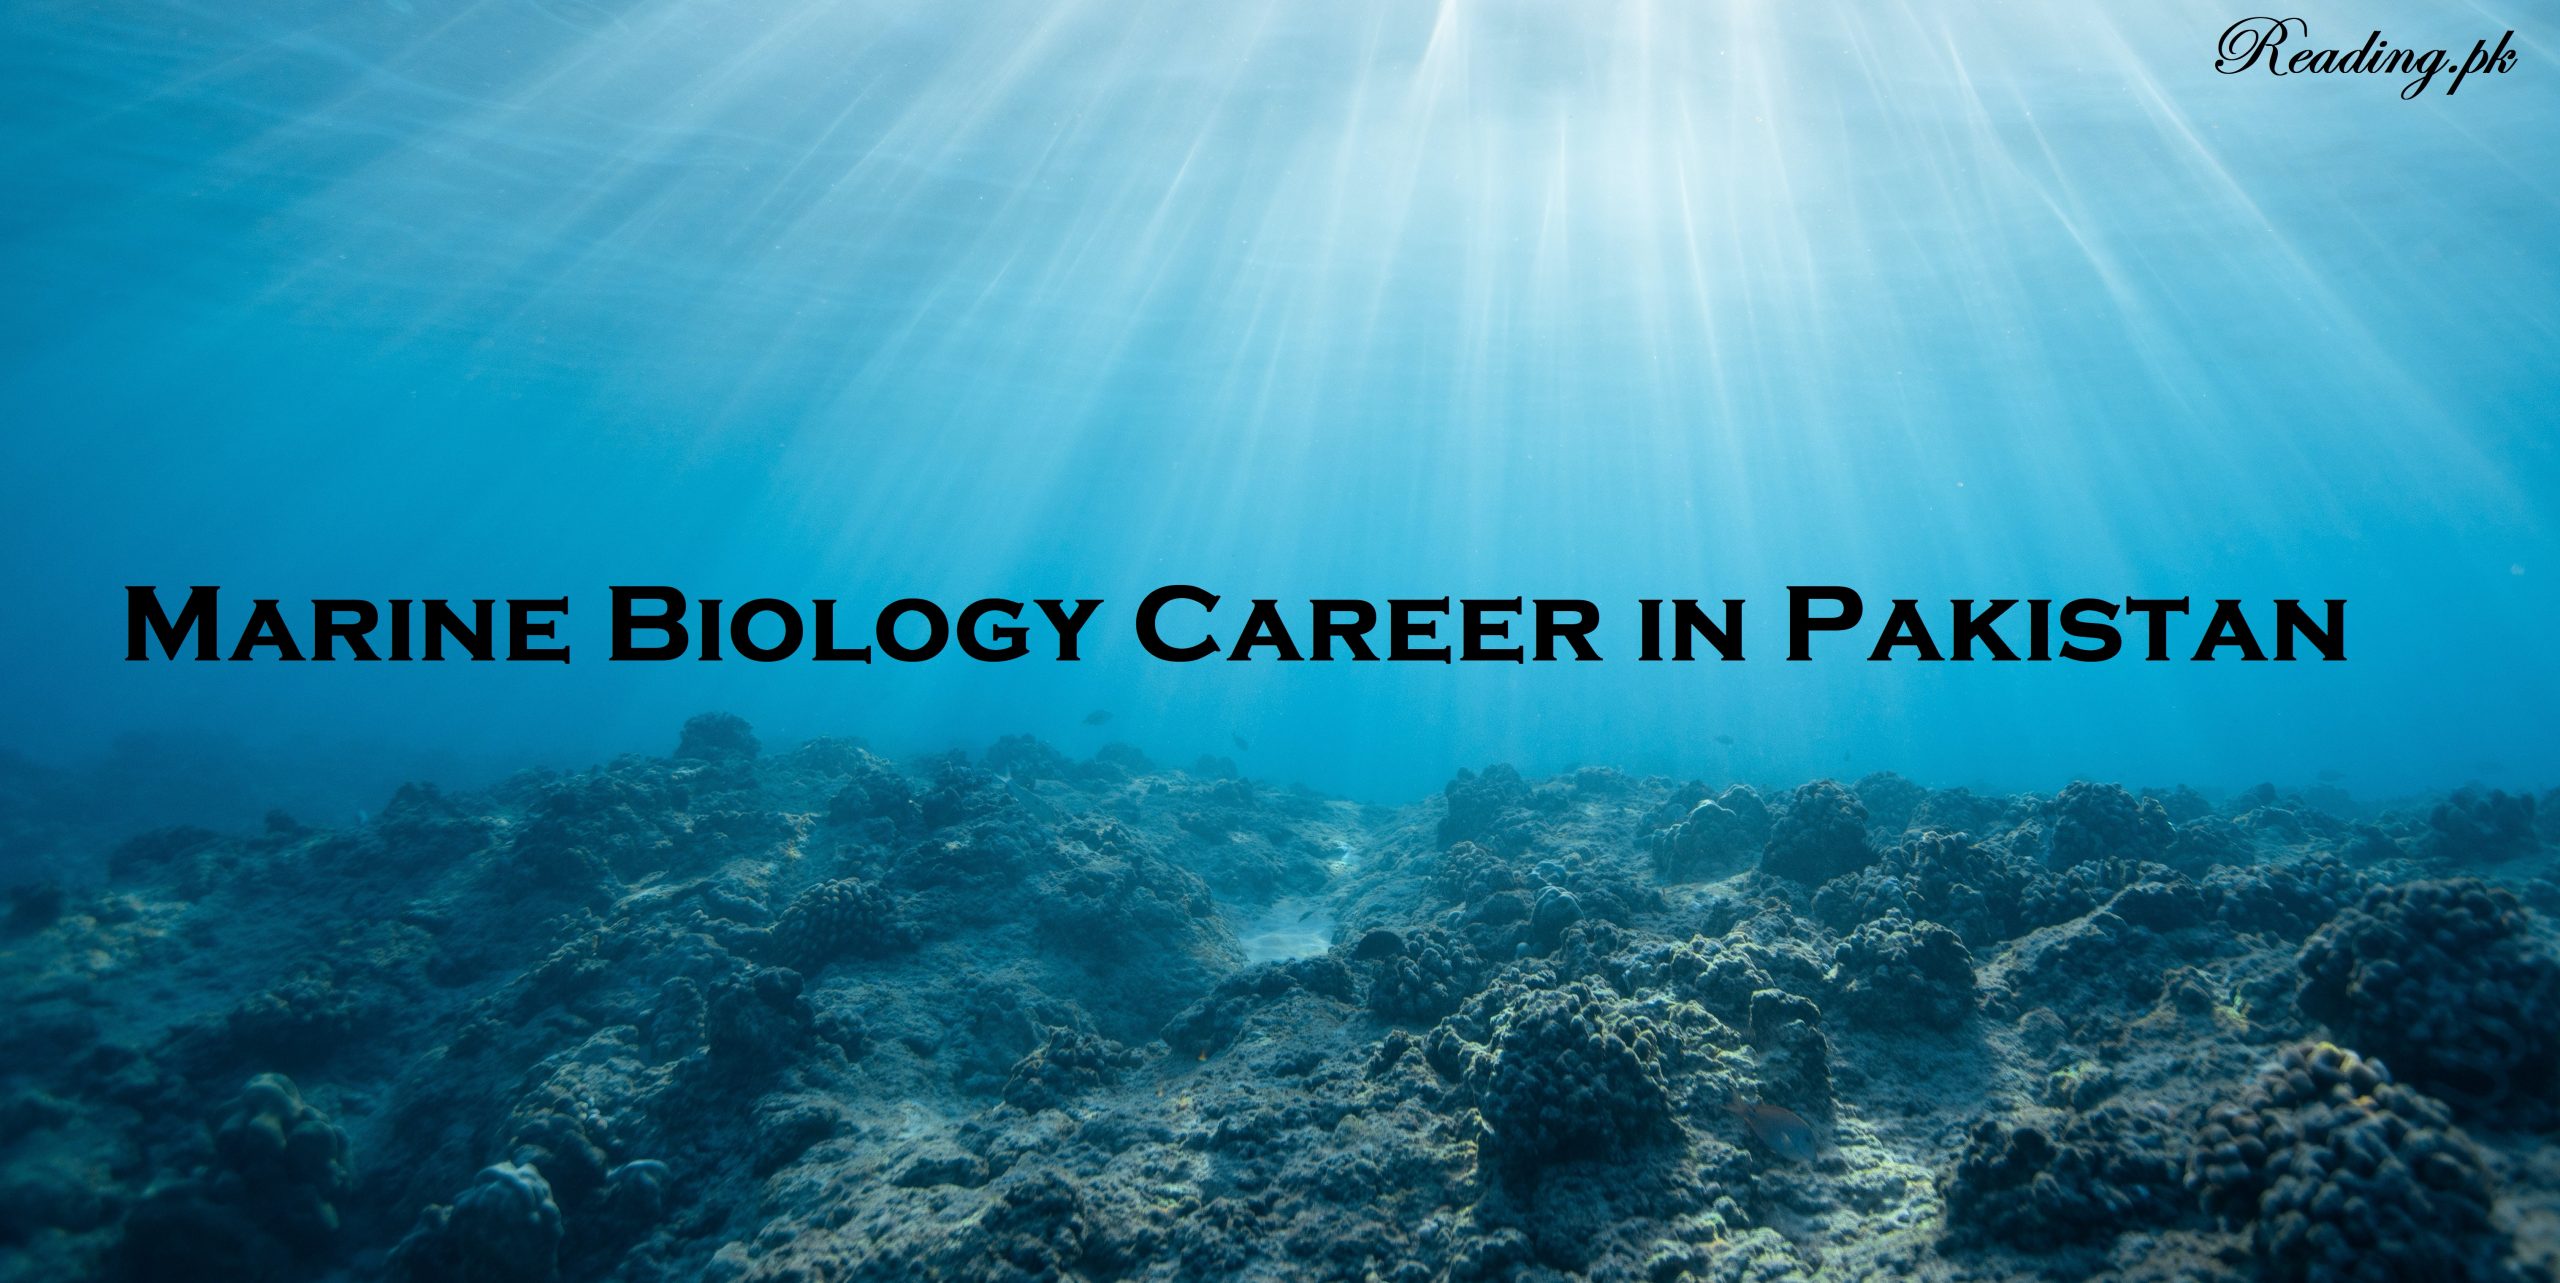 Marine Biology Career in Pakistan Scope, Courses and Jobs